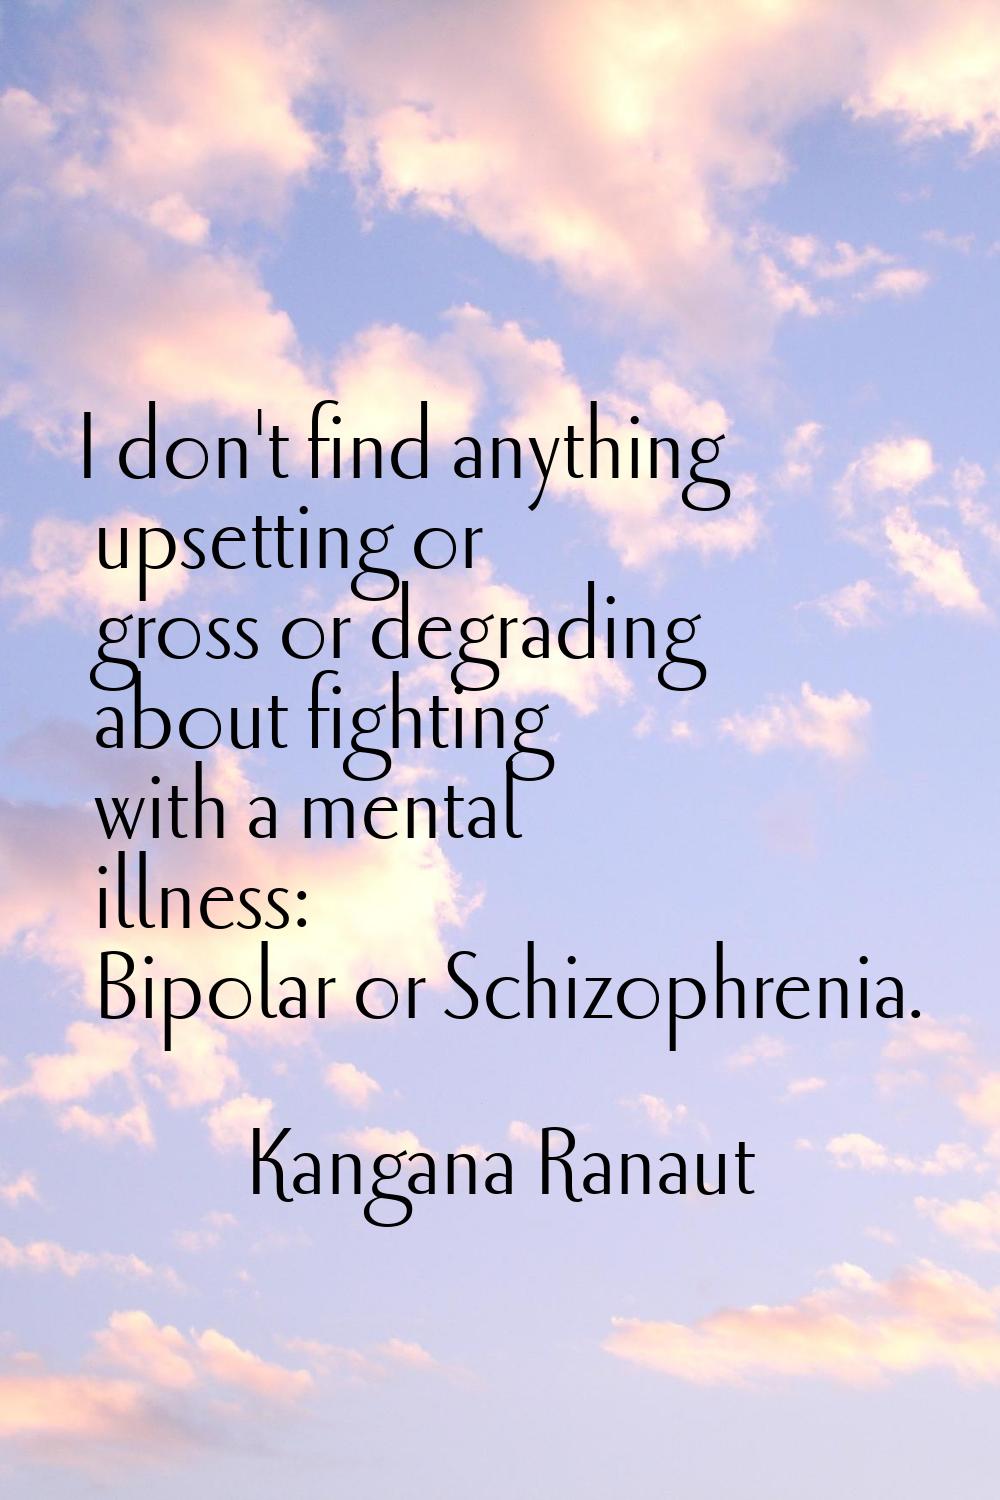 I don't find anything upsetting or gross or degrading about fighting with a mental illness: Bipolar